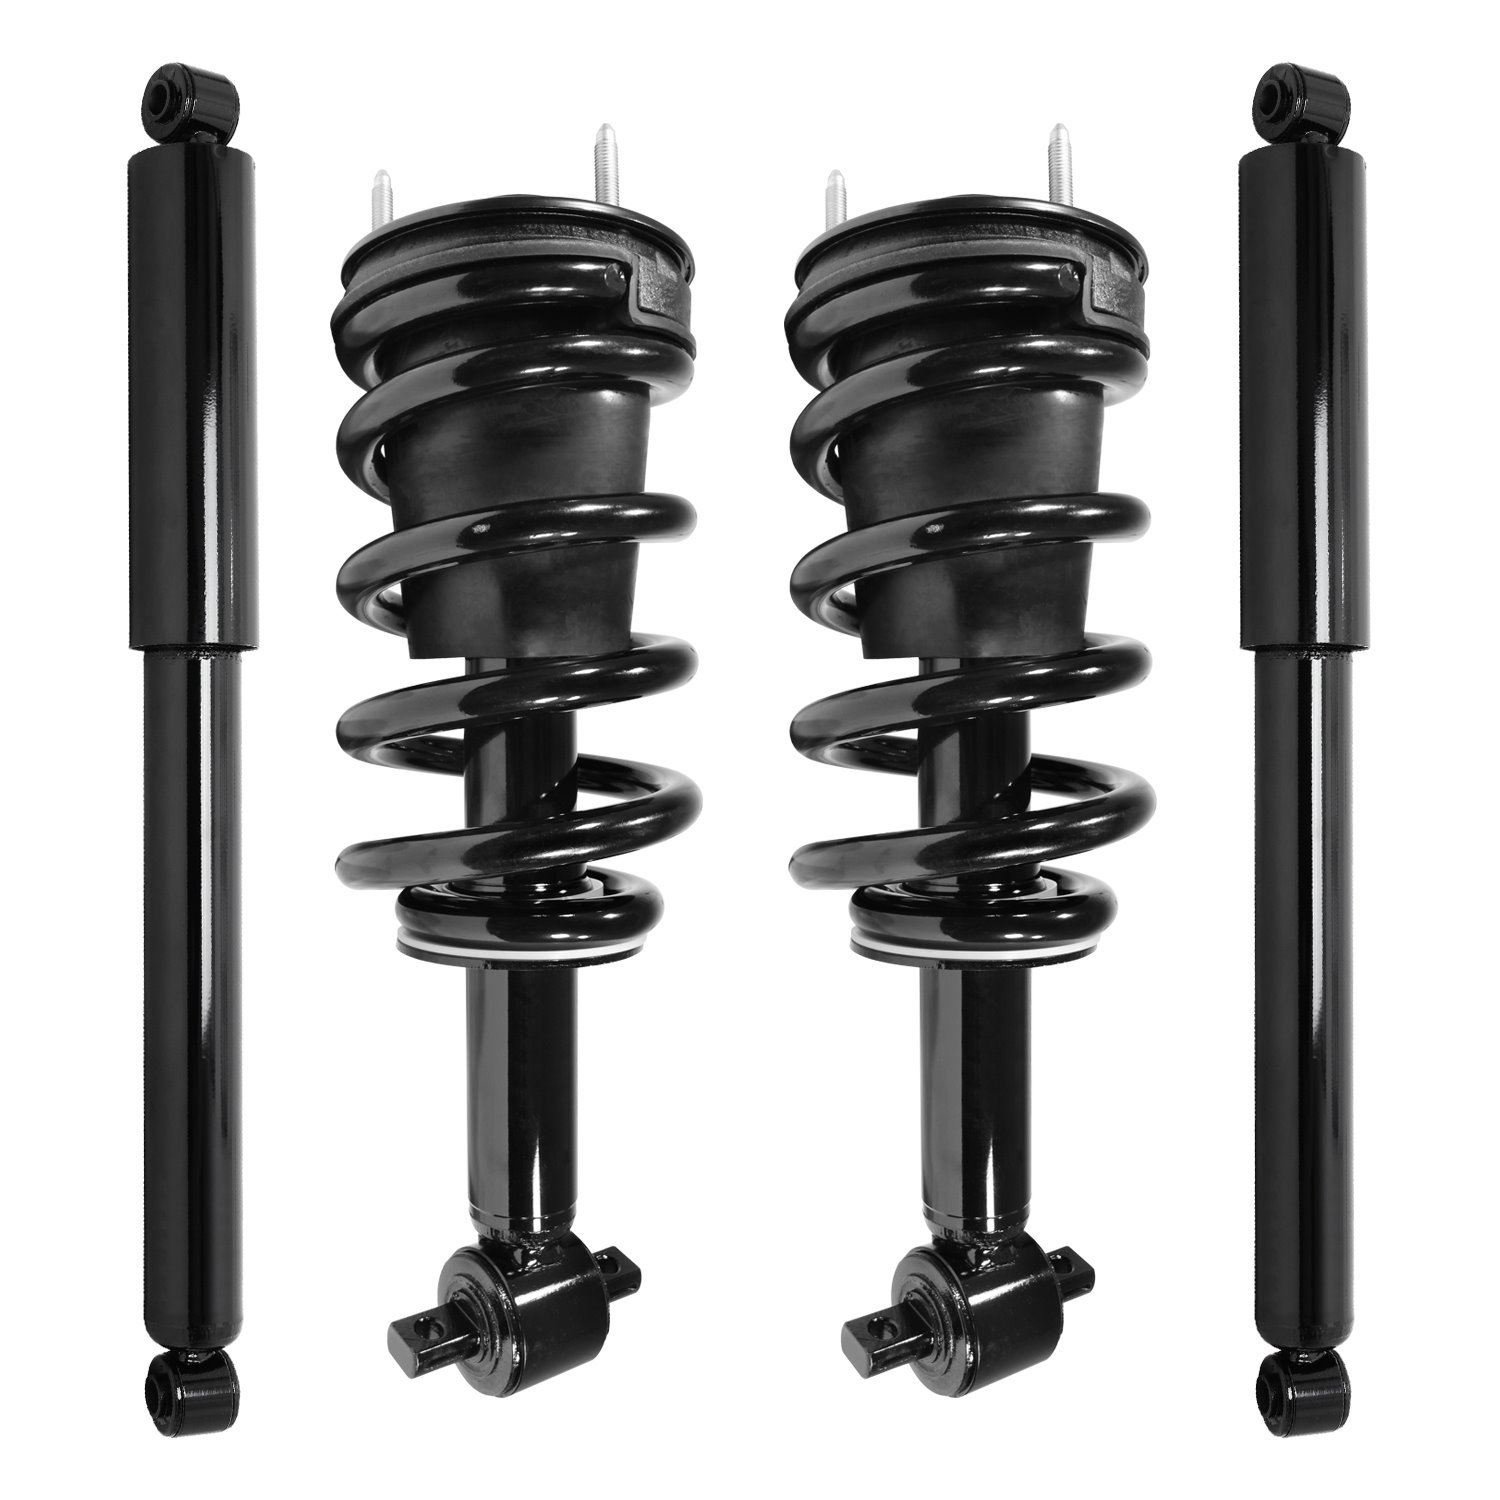 4-11580-251500-001 Front & Rear Suspension Strut & Coil Spring Assembly Fits Select GM